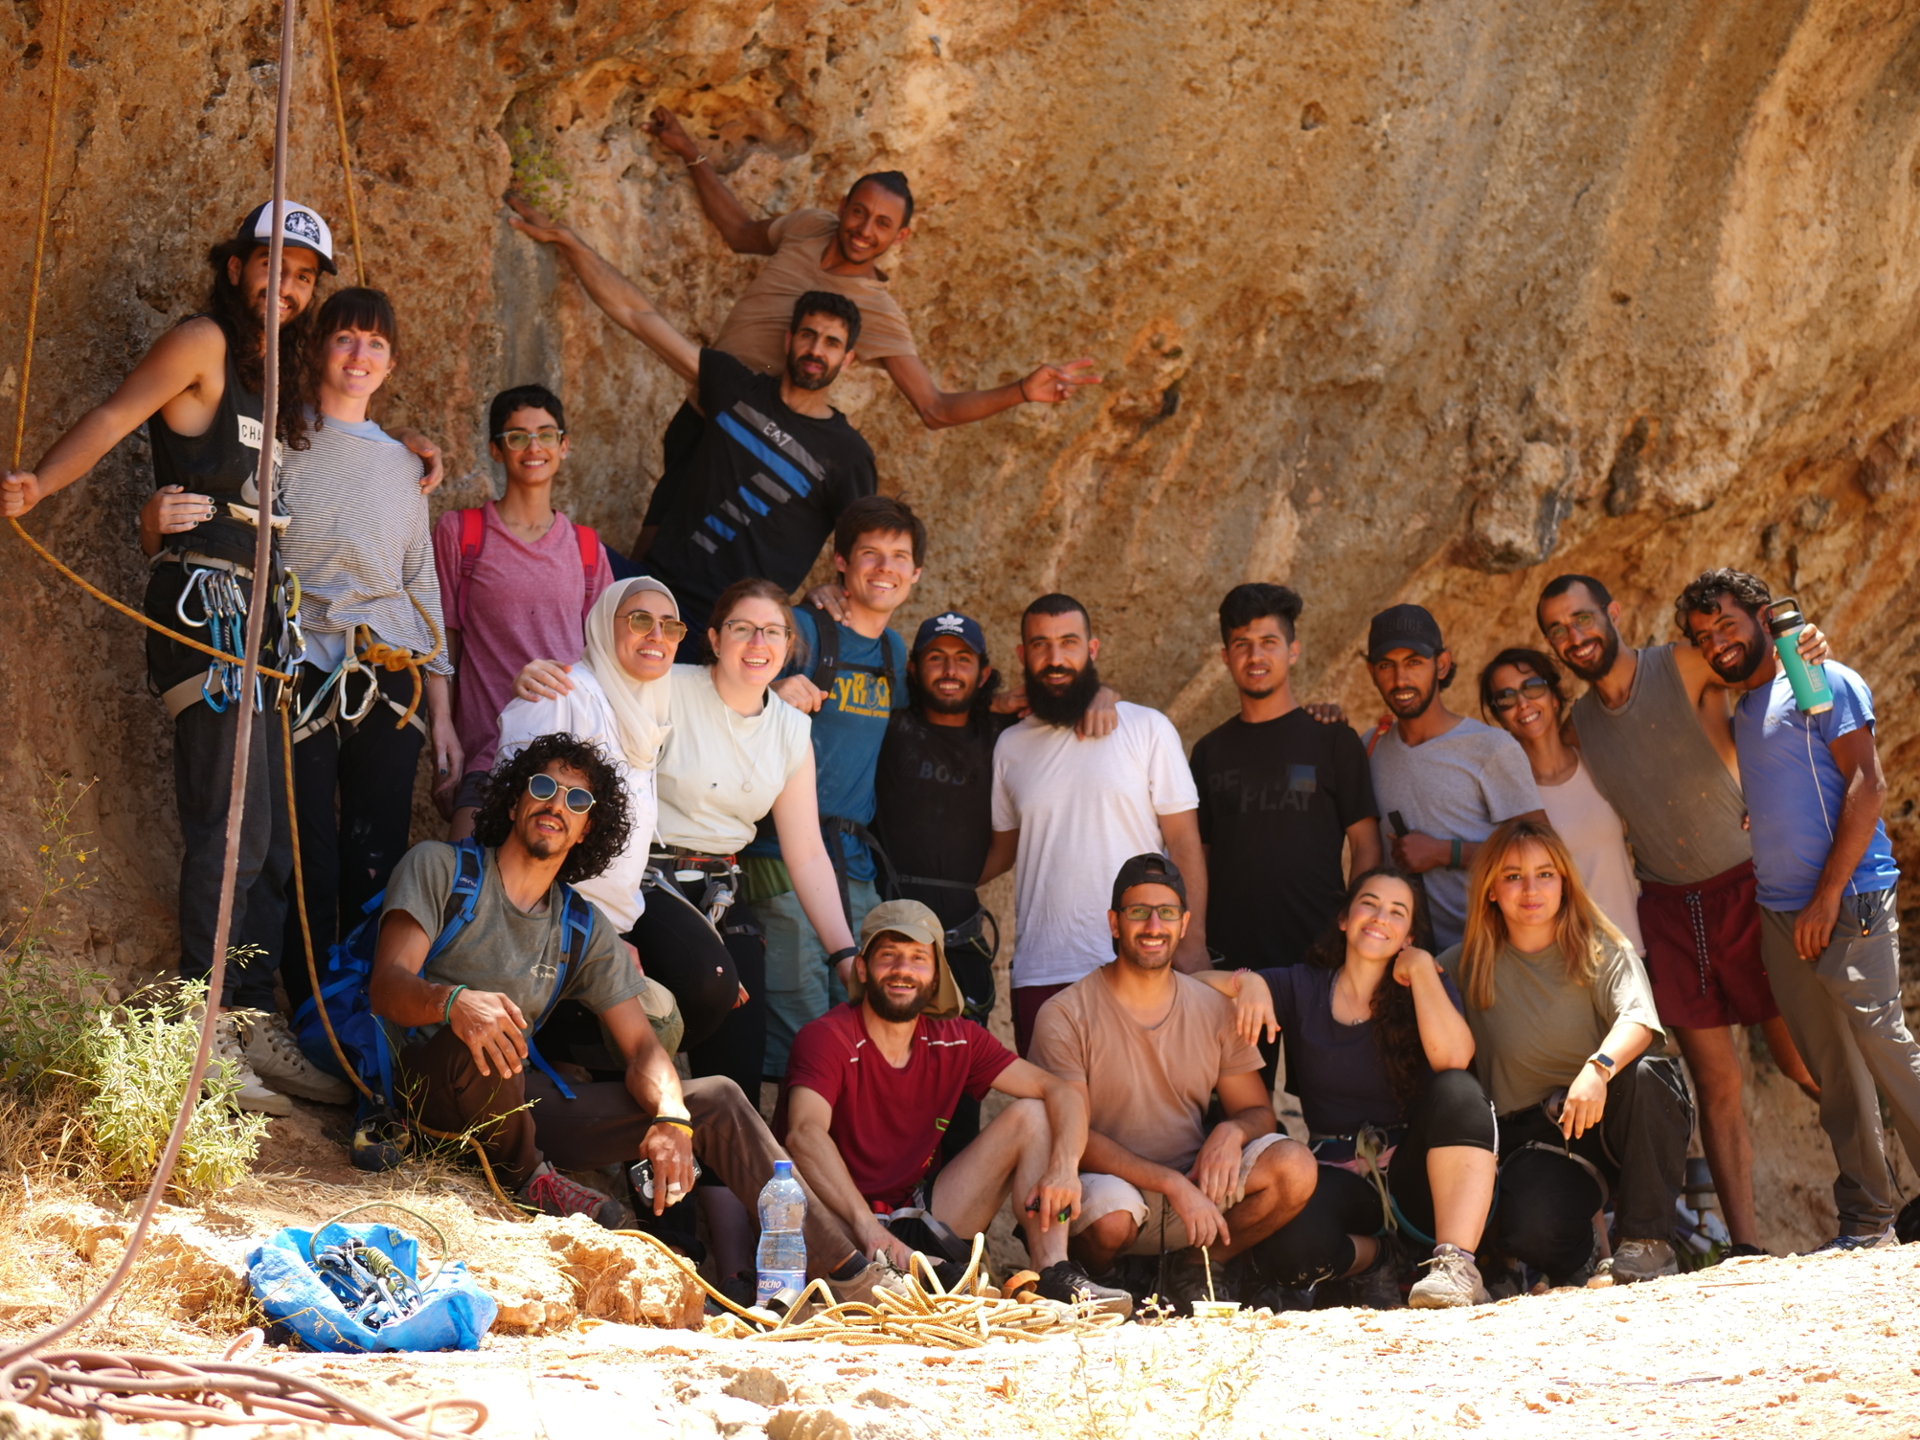 A core group of Palestinian climbers. (Photo by Asia Zughaiar)